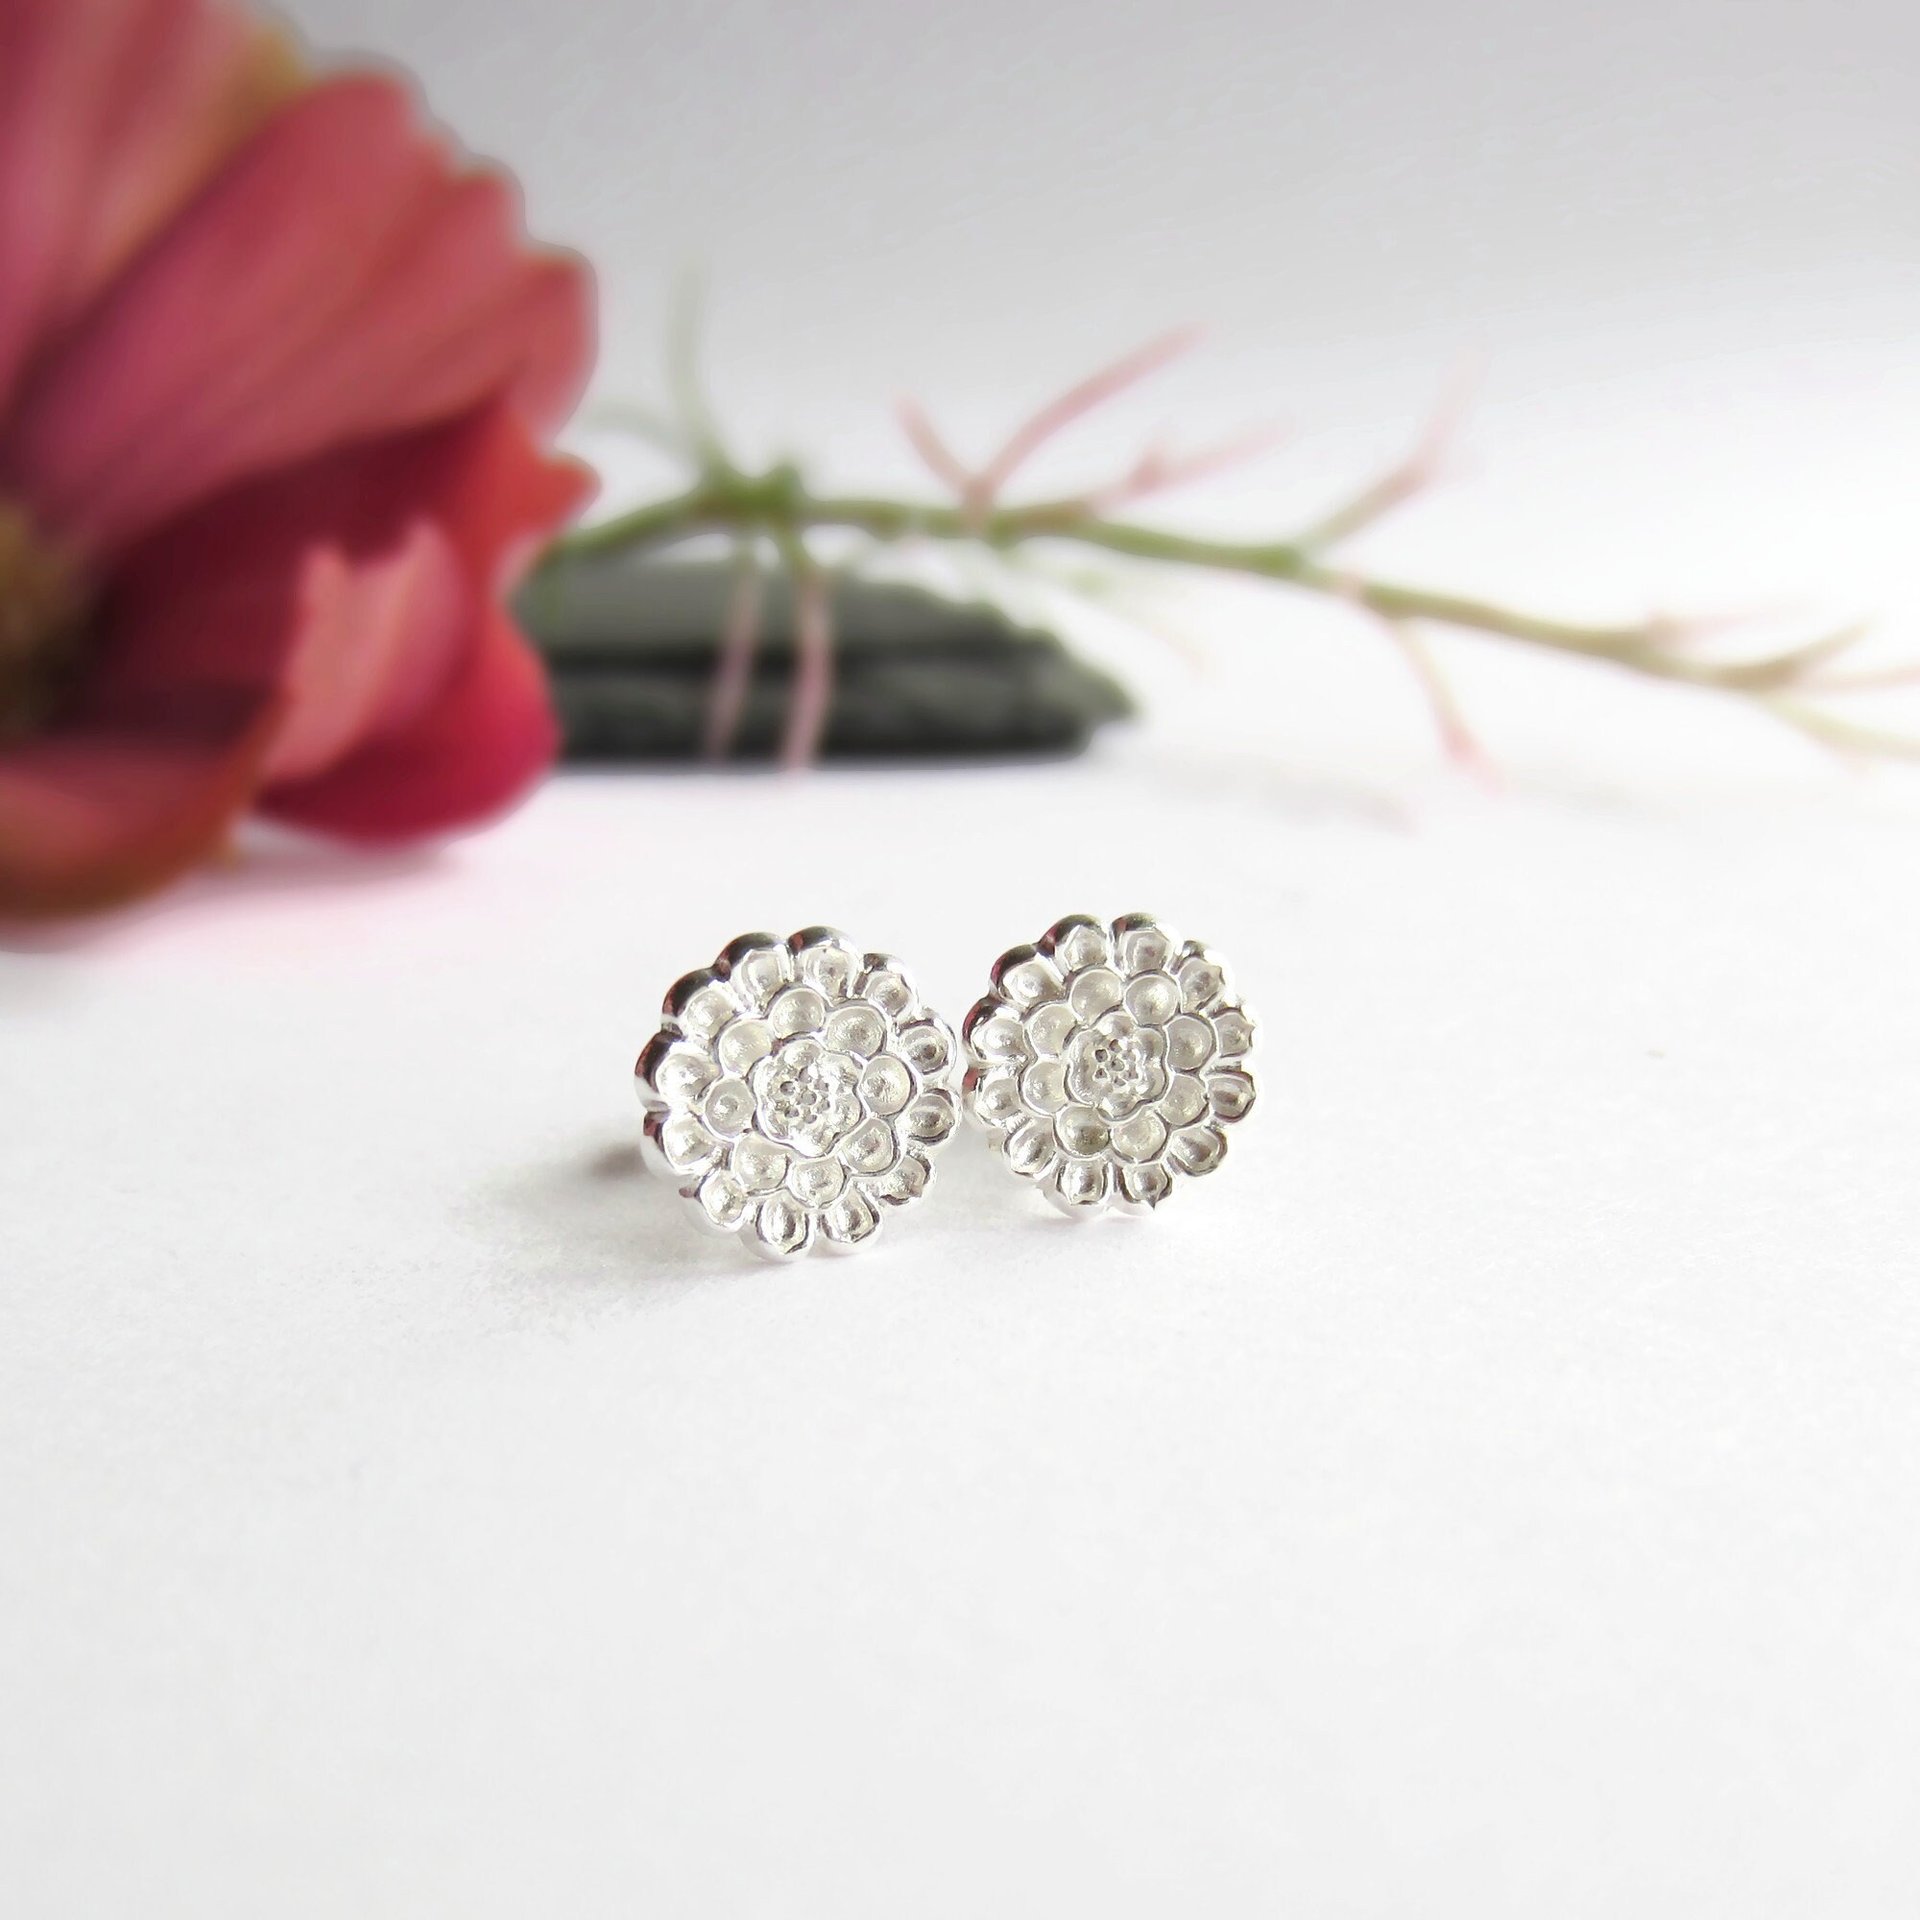 Fine Silver and Sterling Silver Dahlia Flower Stud Earrings ~ Handmade by The Tiny Tree Frog Jewellery